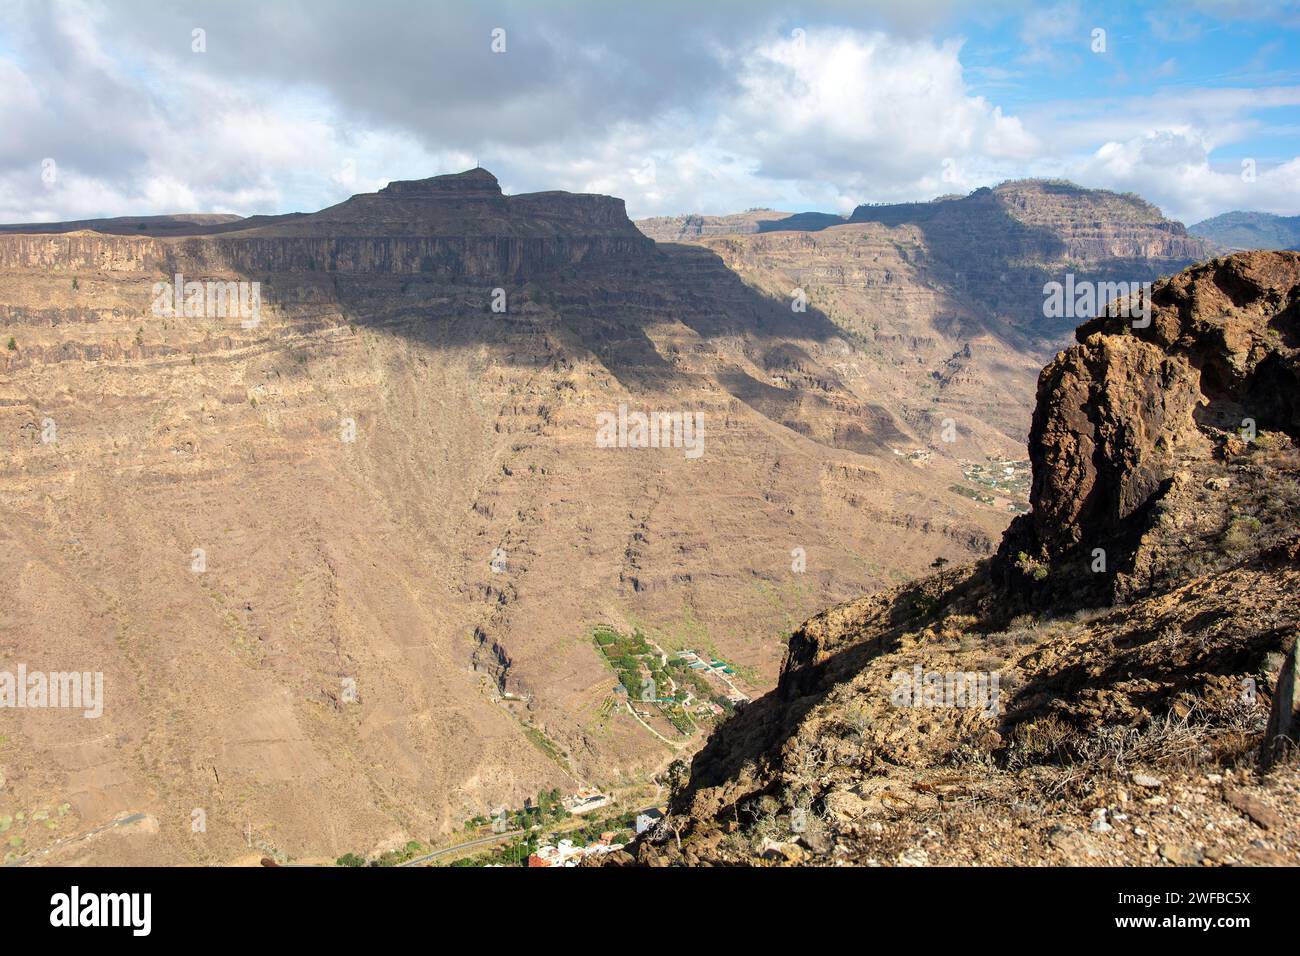 Mountains with a small village in the valley on the Canary Island of Gran Canaria in Spain, with blue sky and clouds Stock Photo